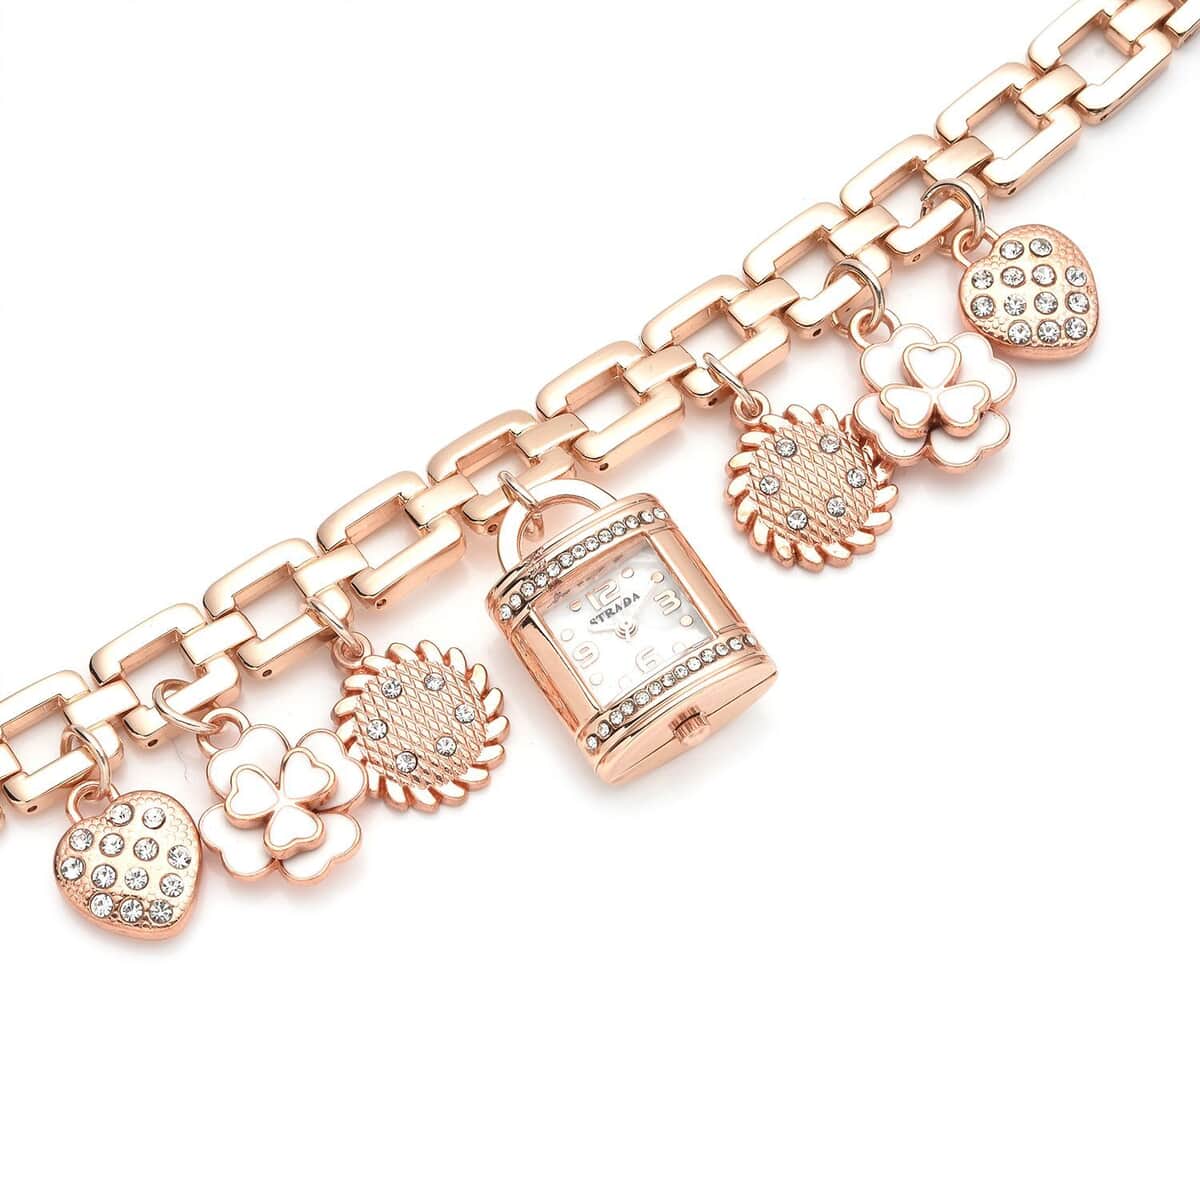 Strada Austrian Crystal and Enameled Japanese Movement Multi Charm Bracelet Watch (7.50 in) in Rosetone image number 3